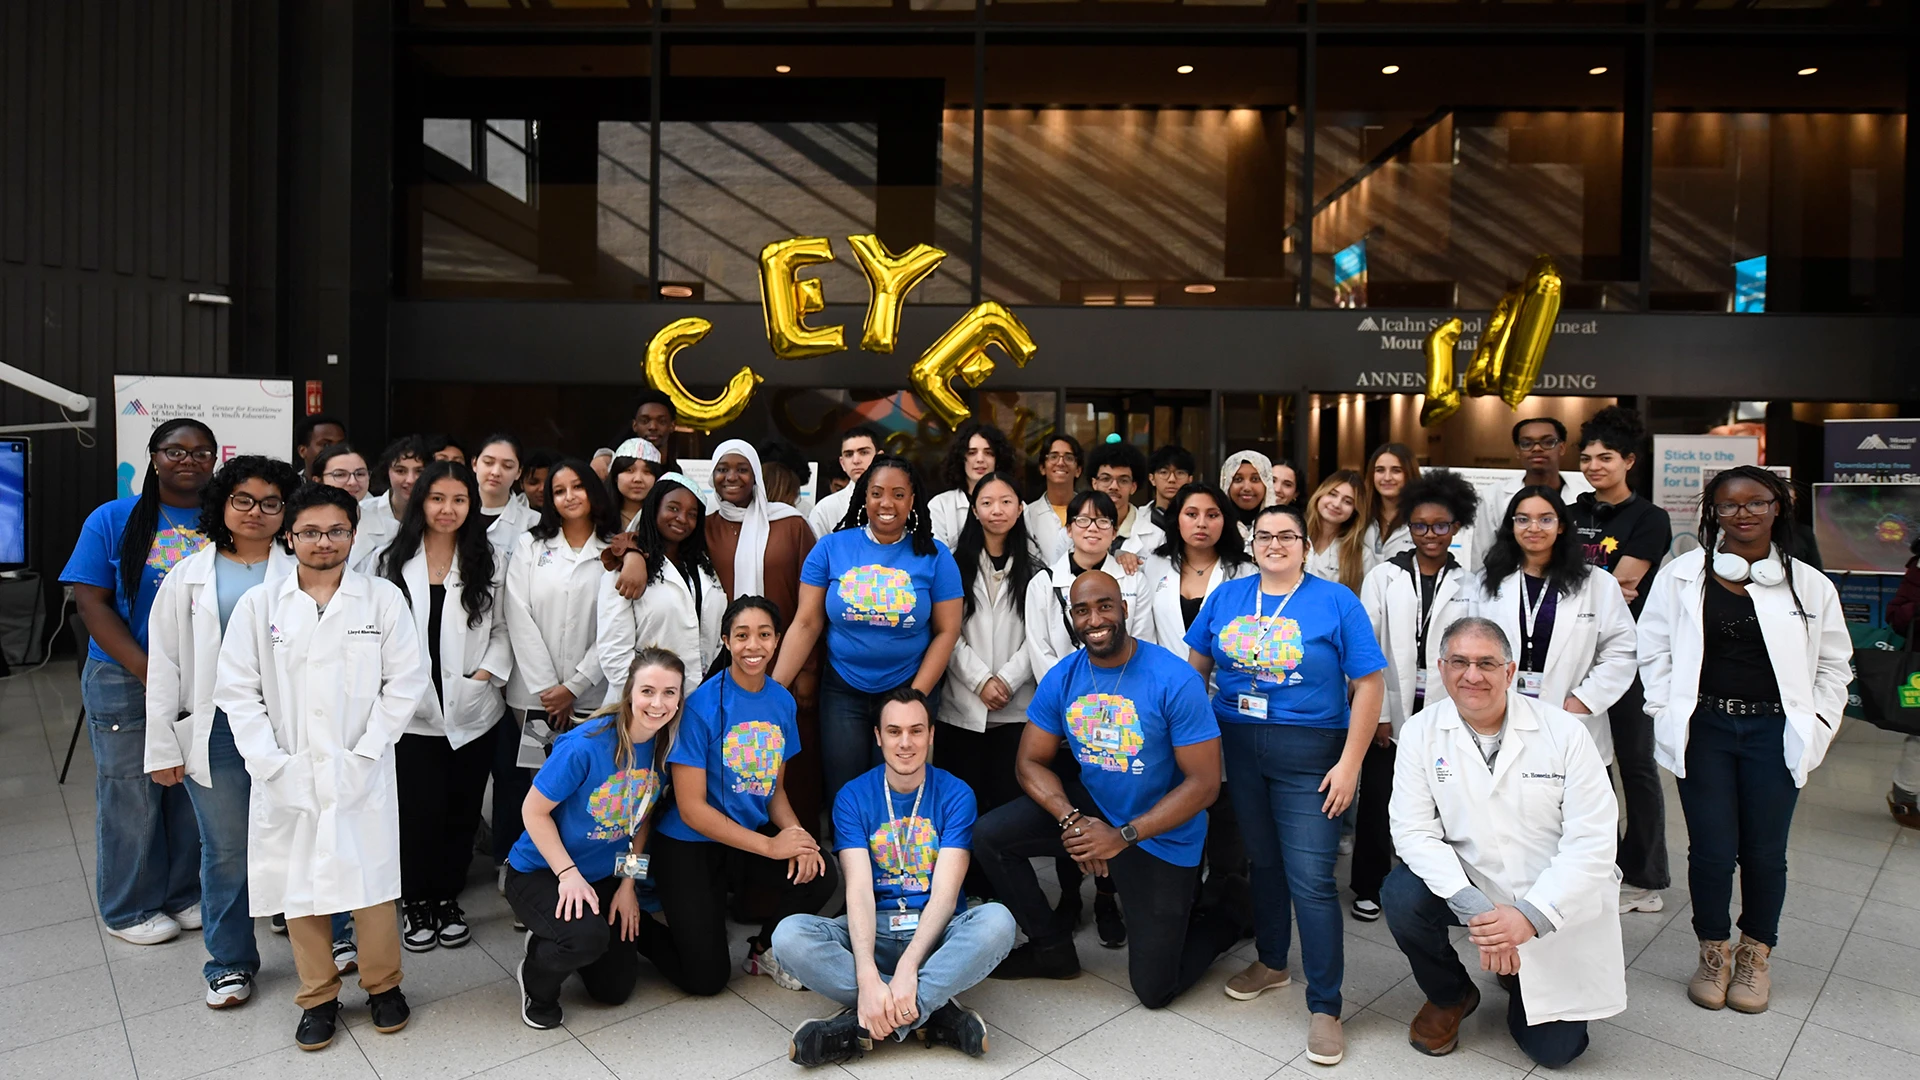 The CEYE team at the Brain Fair with high school students enrolled in the Biomedical Science Enrichment Program and The Lloyd Sherman Scholars Program. 